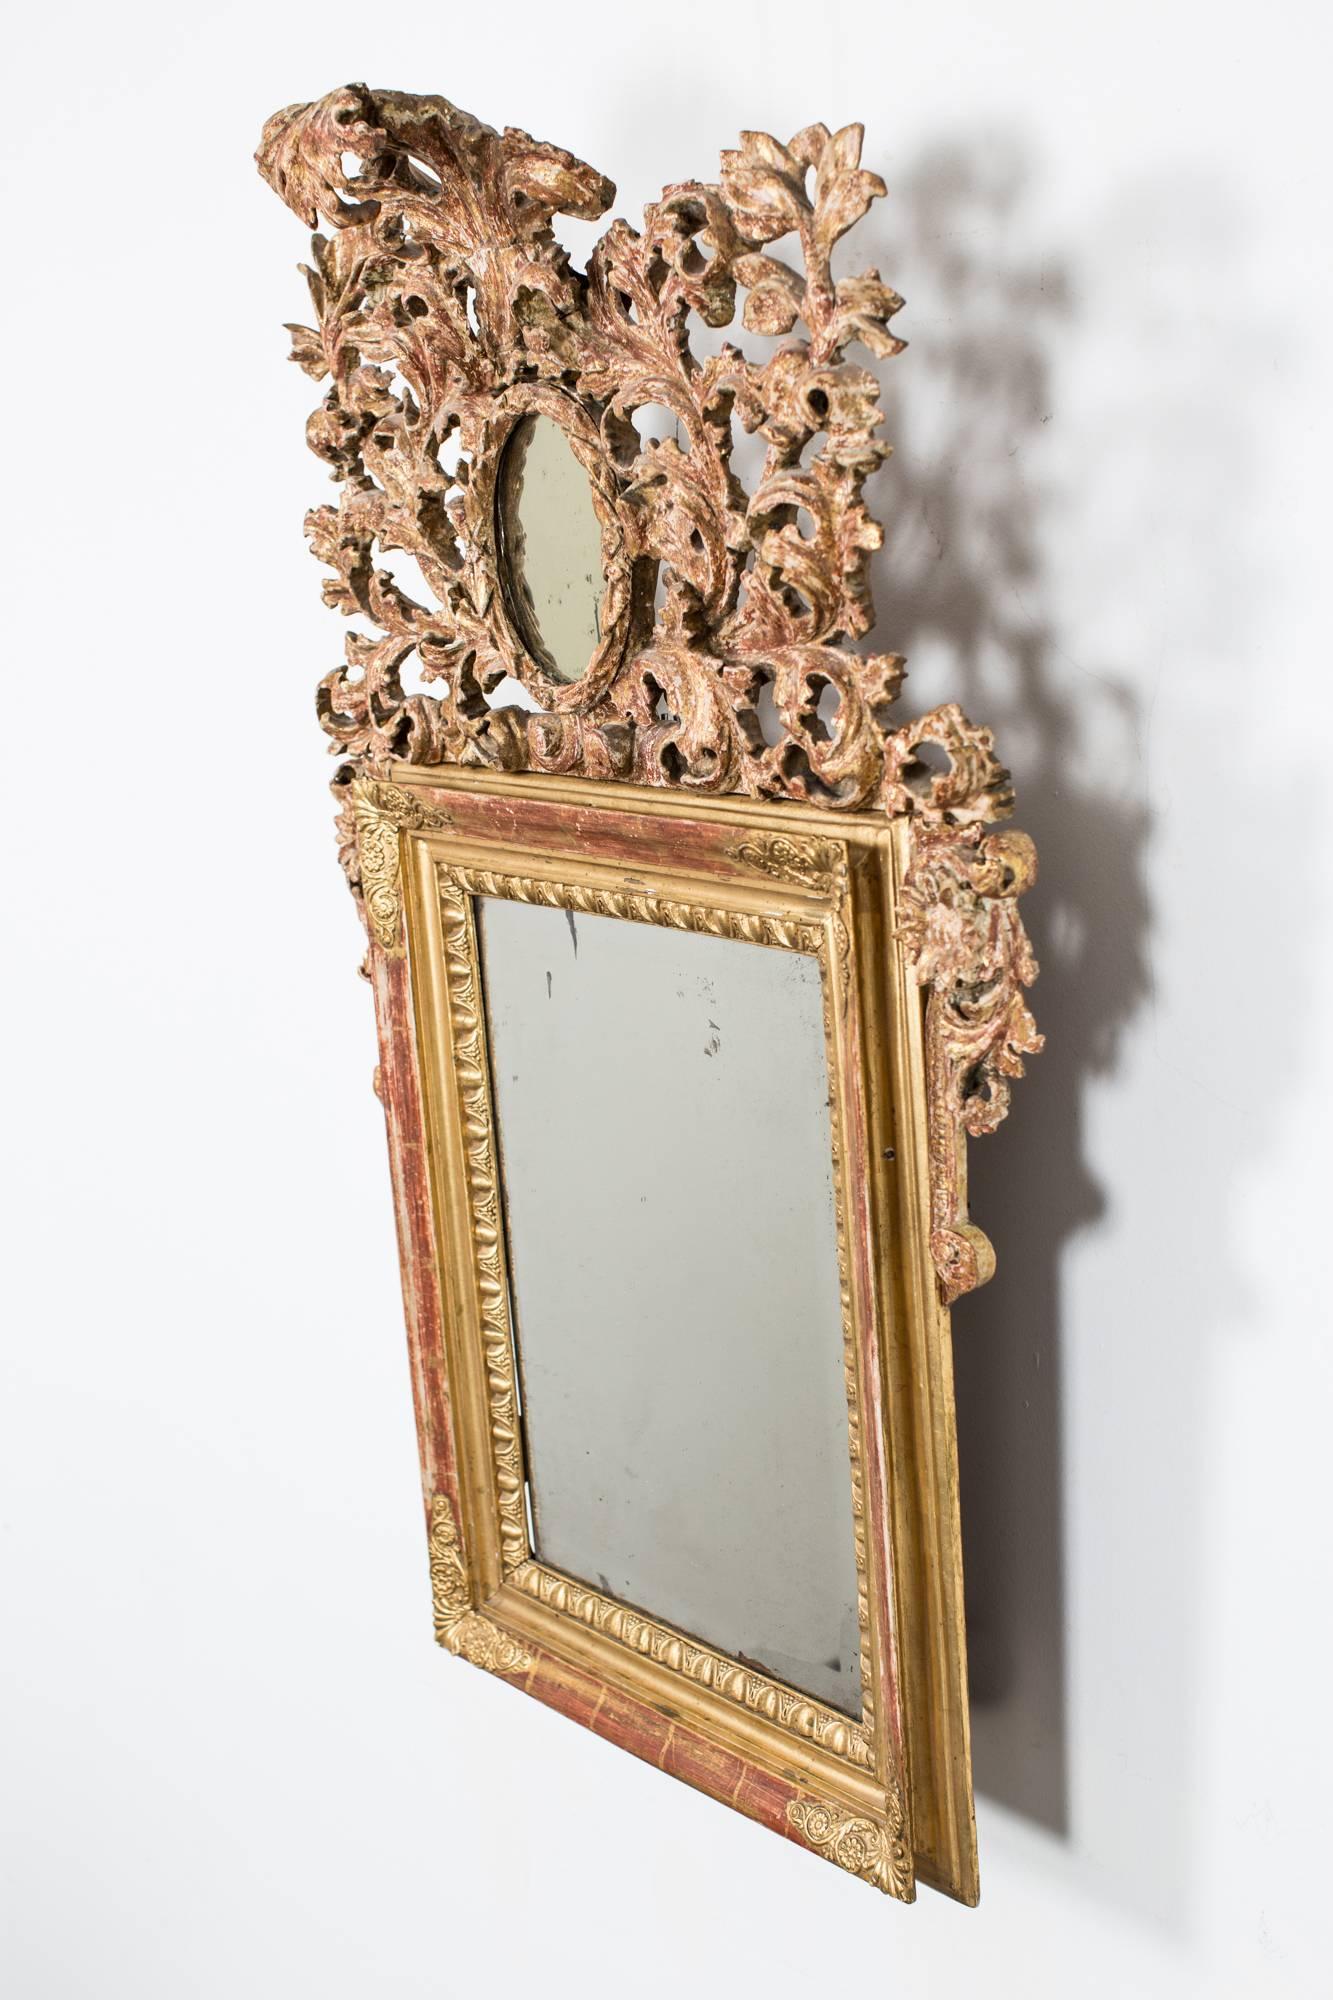 A wall mirror made during the Baroque period in Northern Europe. Original gilding. New mirror glass.